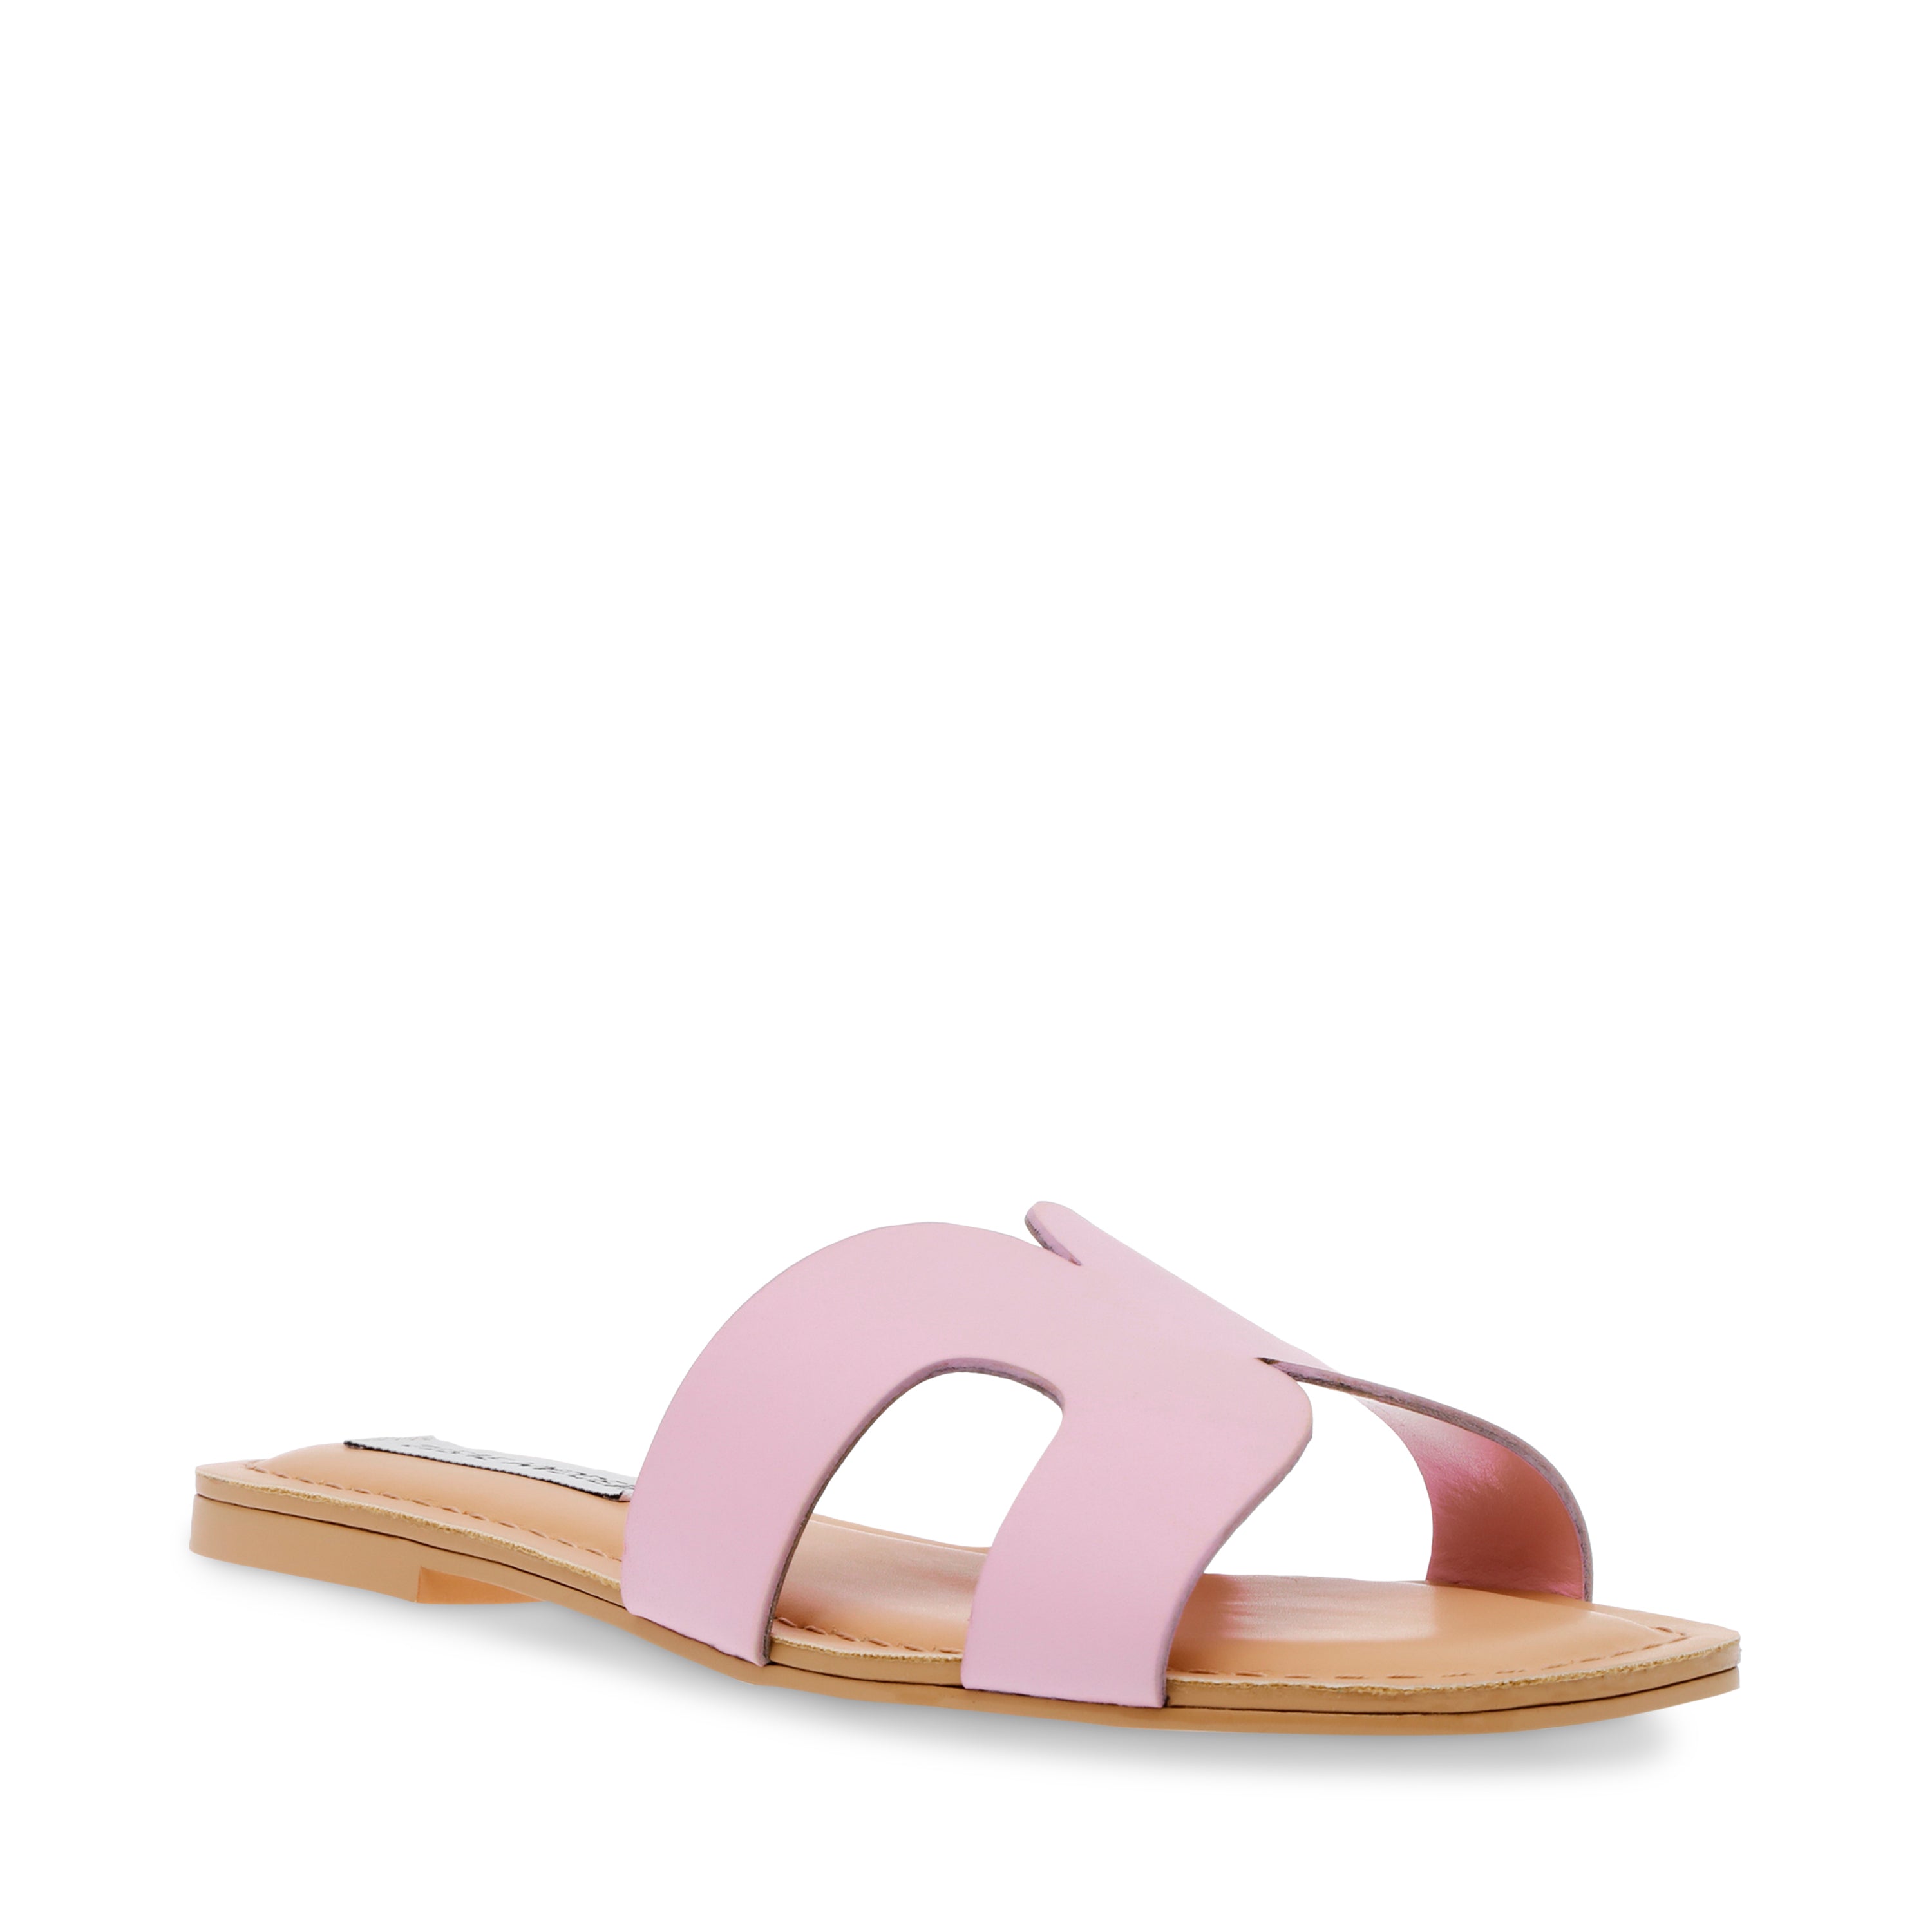 Zarnia Sandal PINK LEATHER- Hover Image